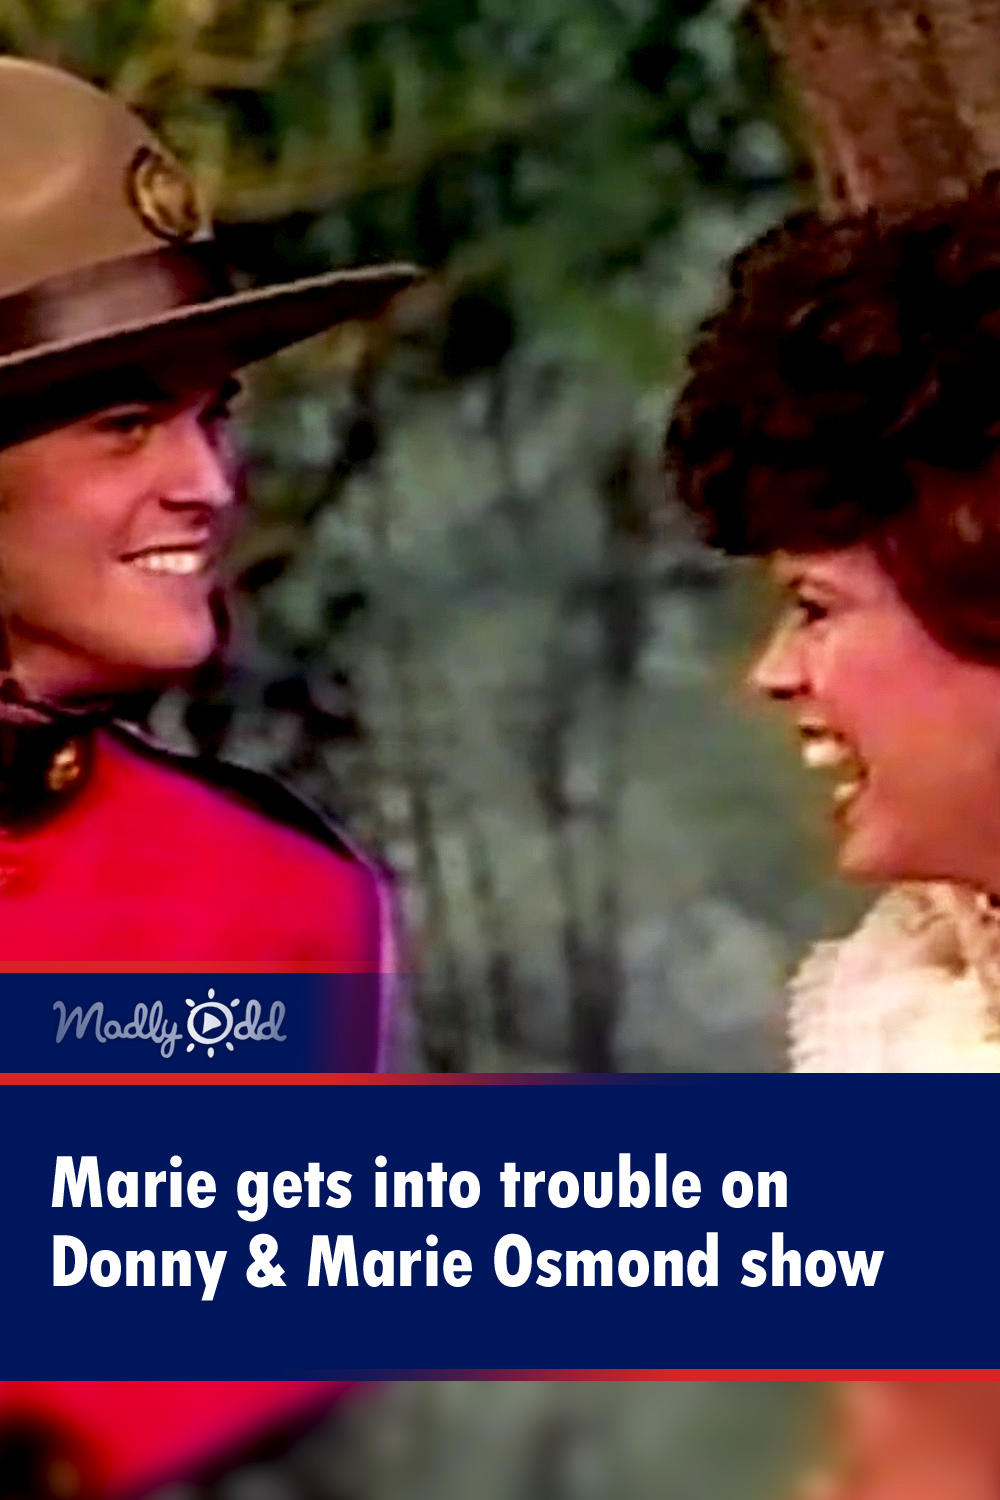 Marie gets into trouble on Donny & Marie Osmond show